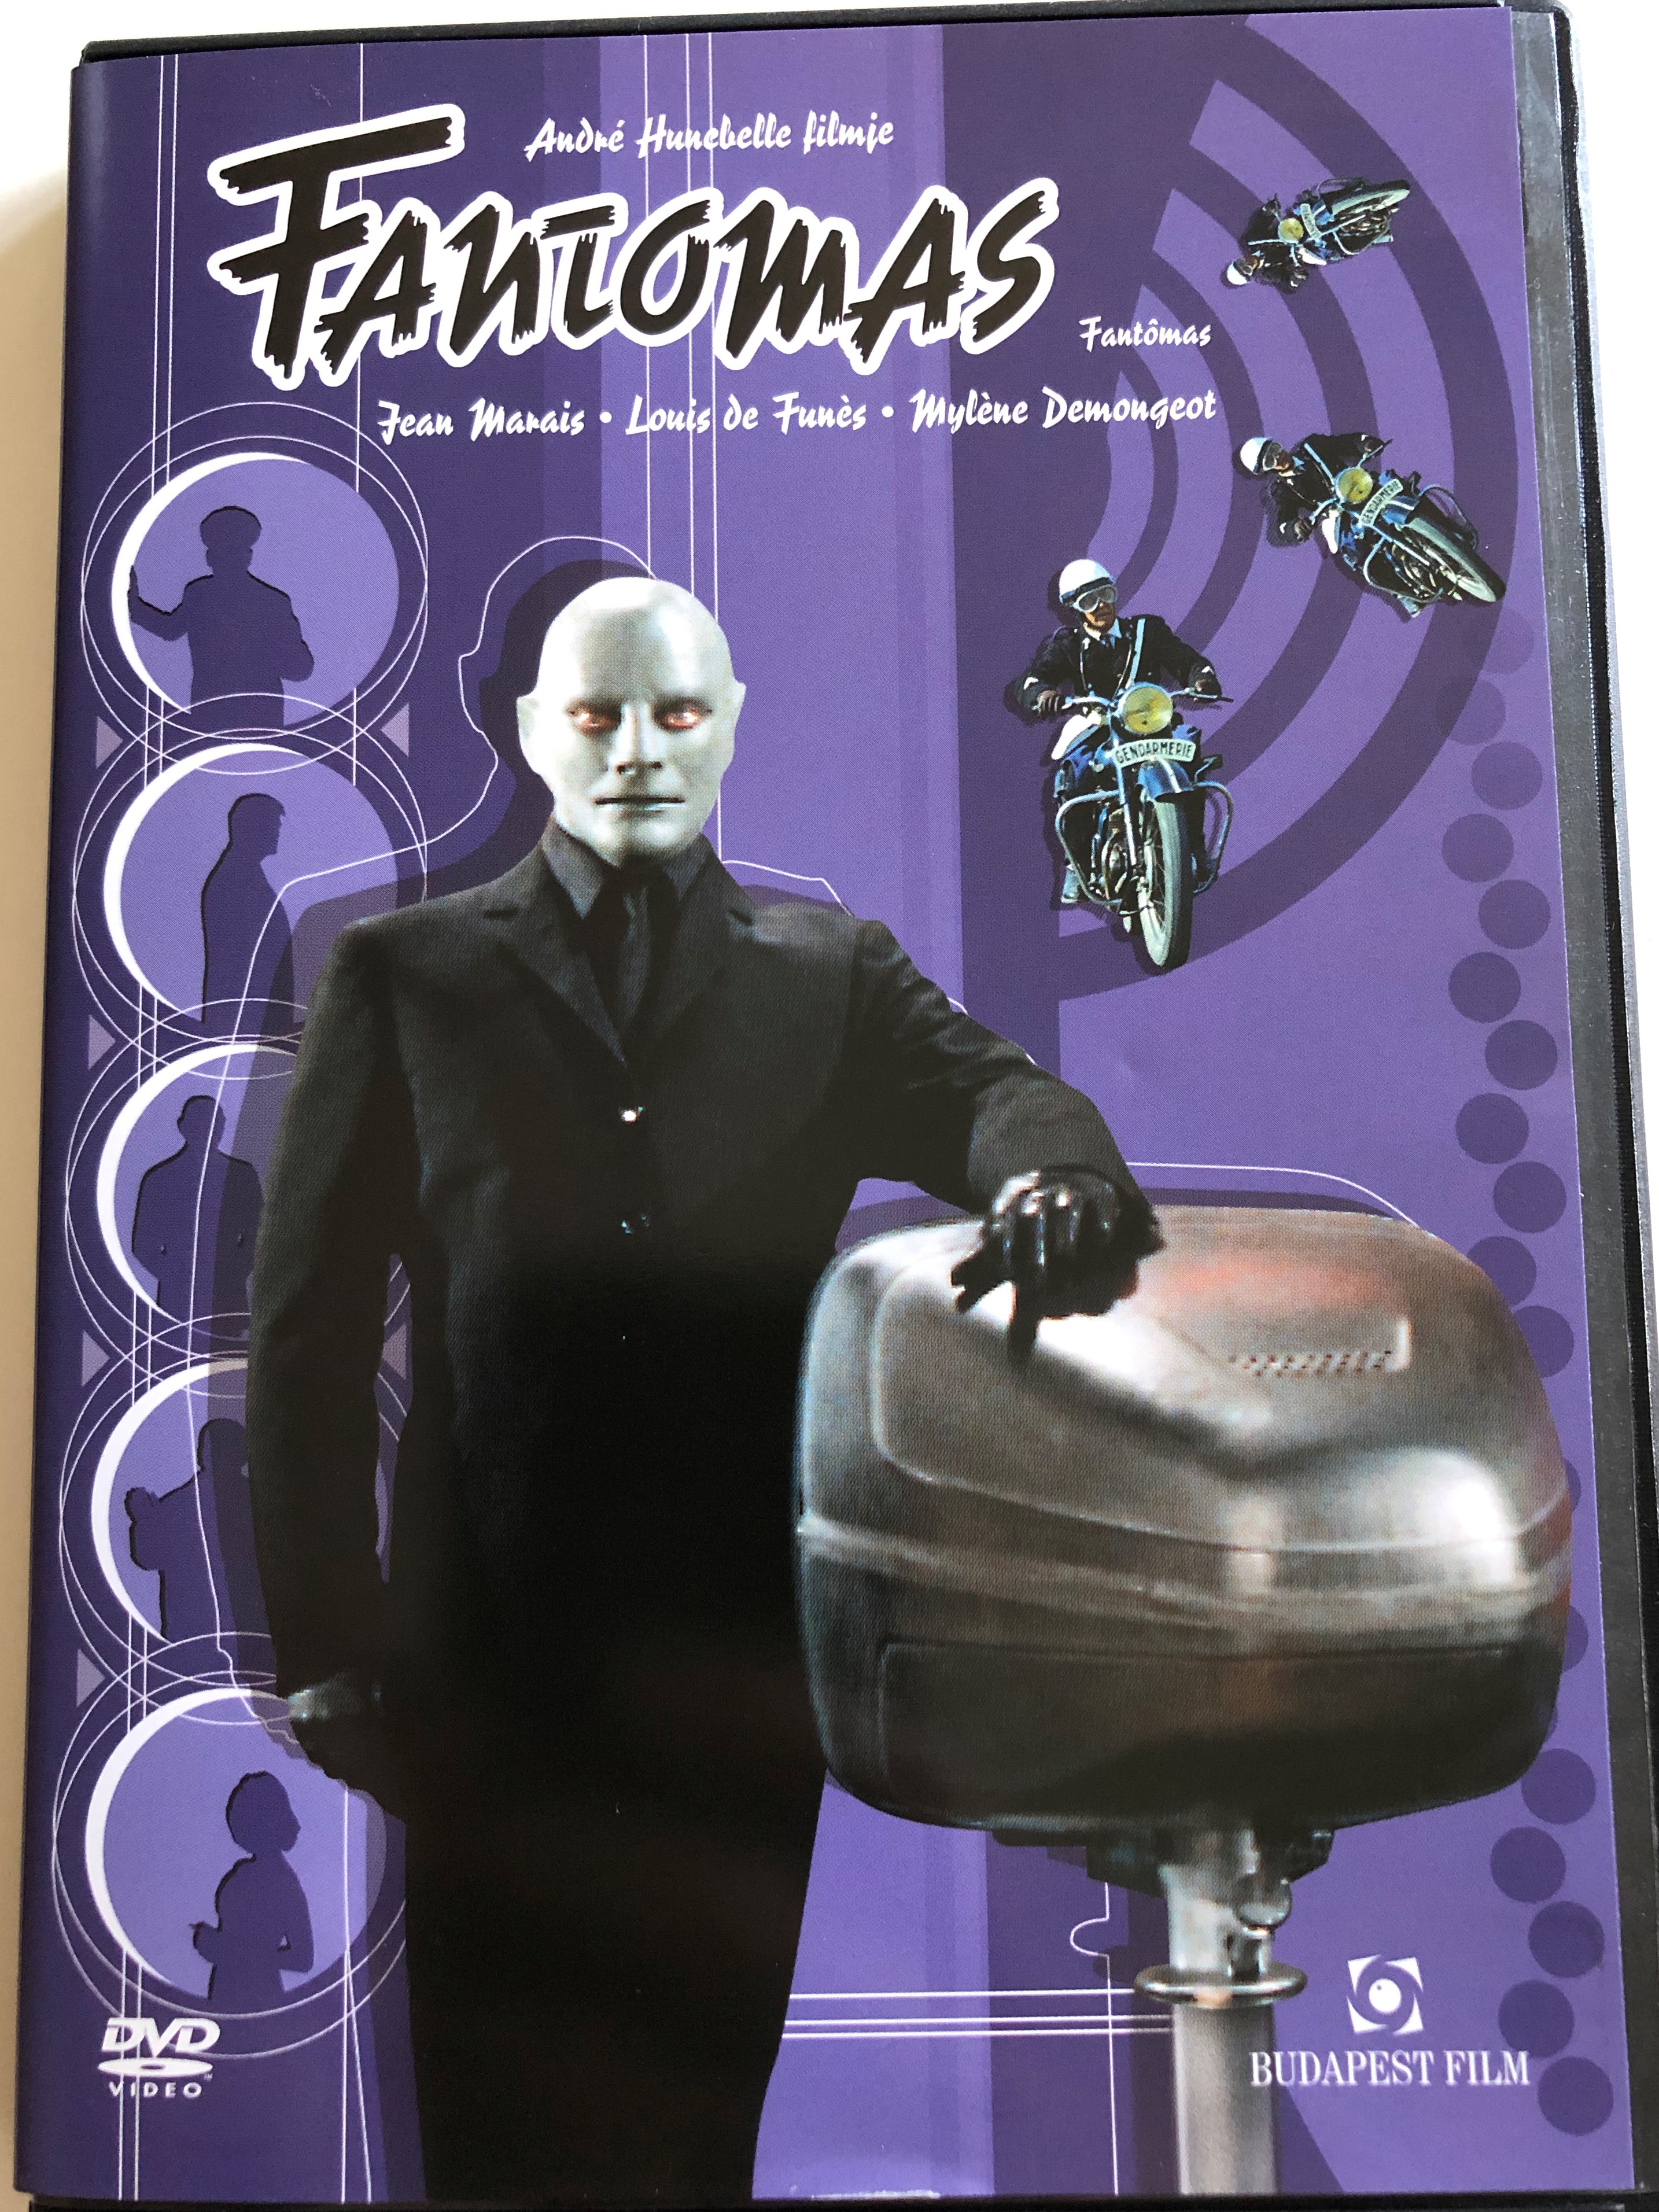 Fantomas DVD 1964 / Directed by André Hunebelle / Starring: Jean